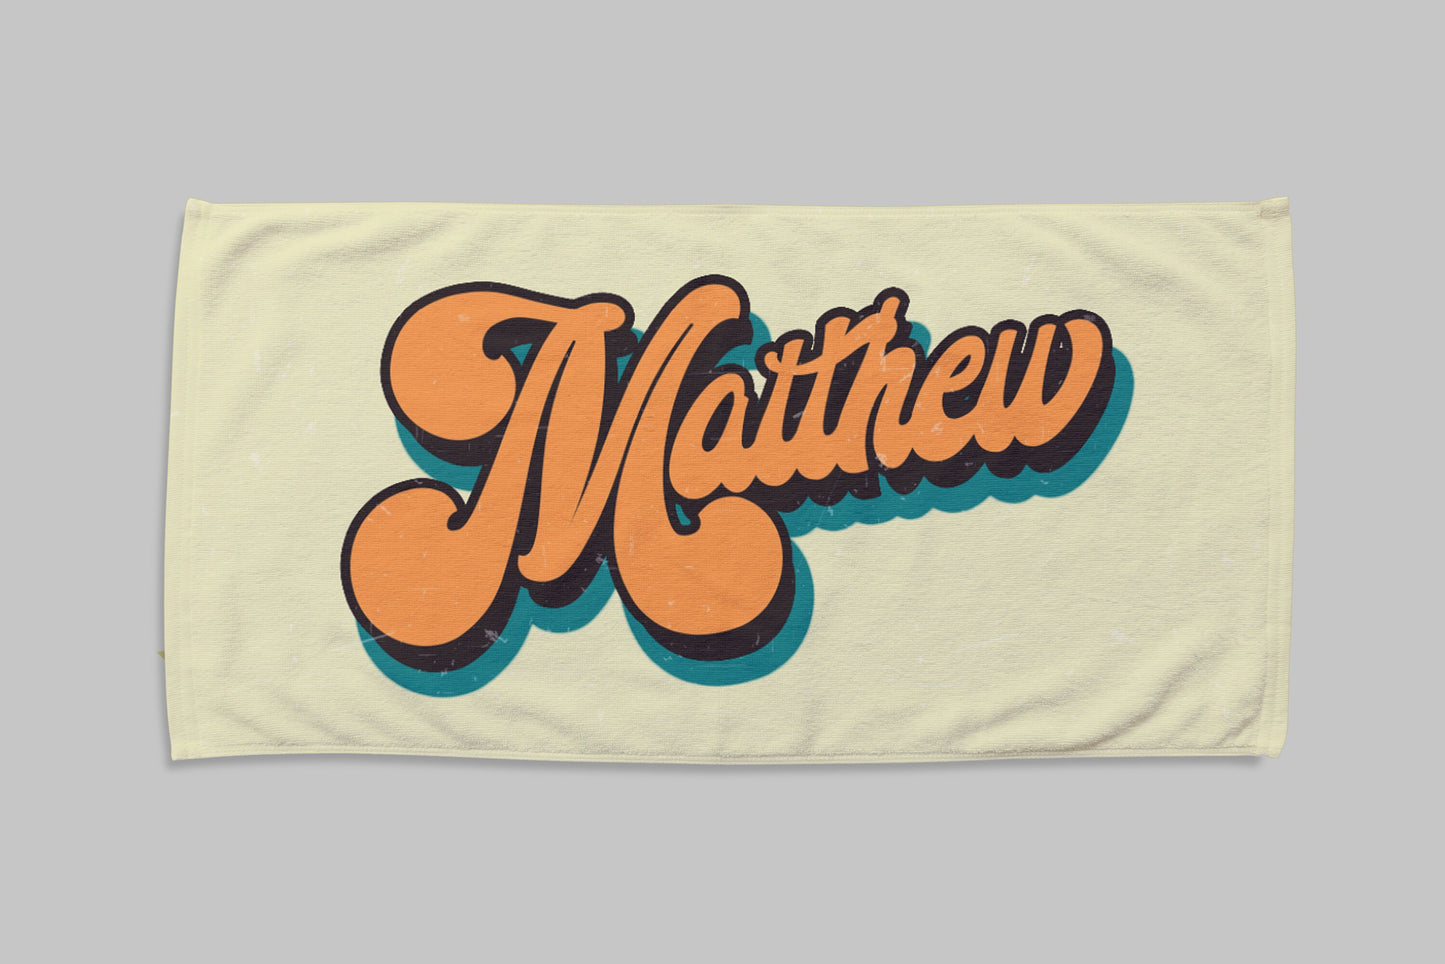 New RETRO Style Personalized Beach Towel Personalized Name Bath Towel Custom Pool Towel Beach Towel With Name Outside Birthday Vacation Gift